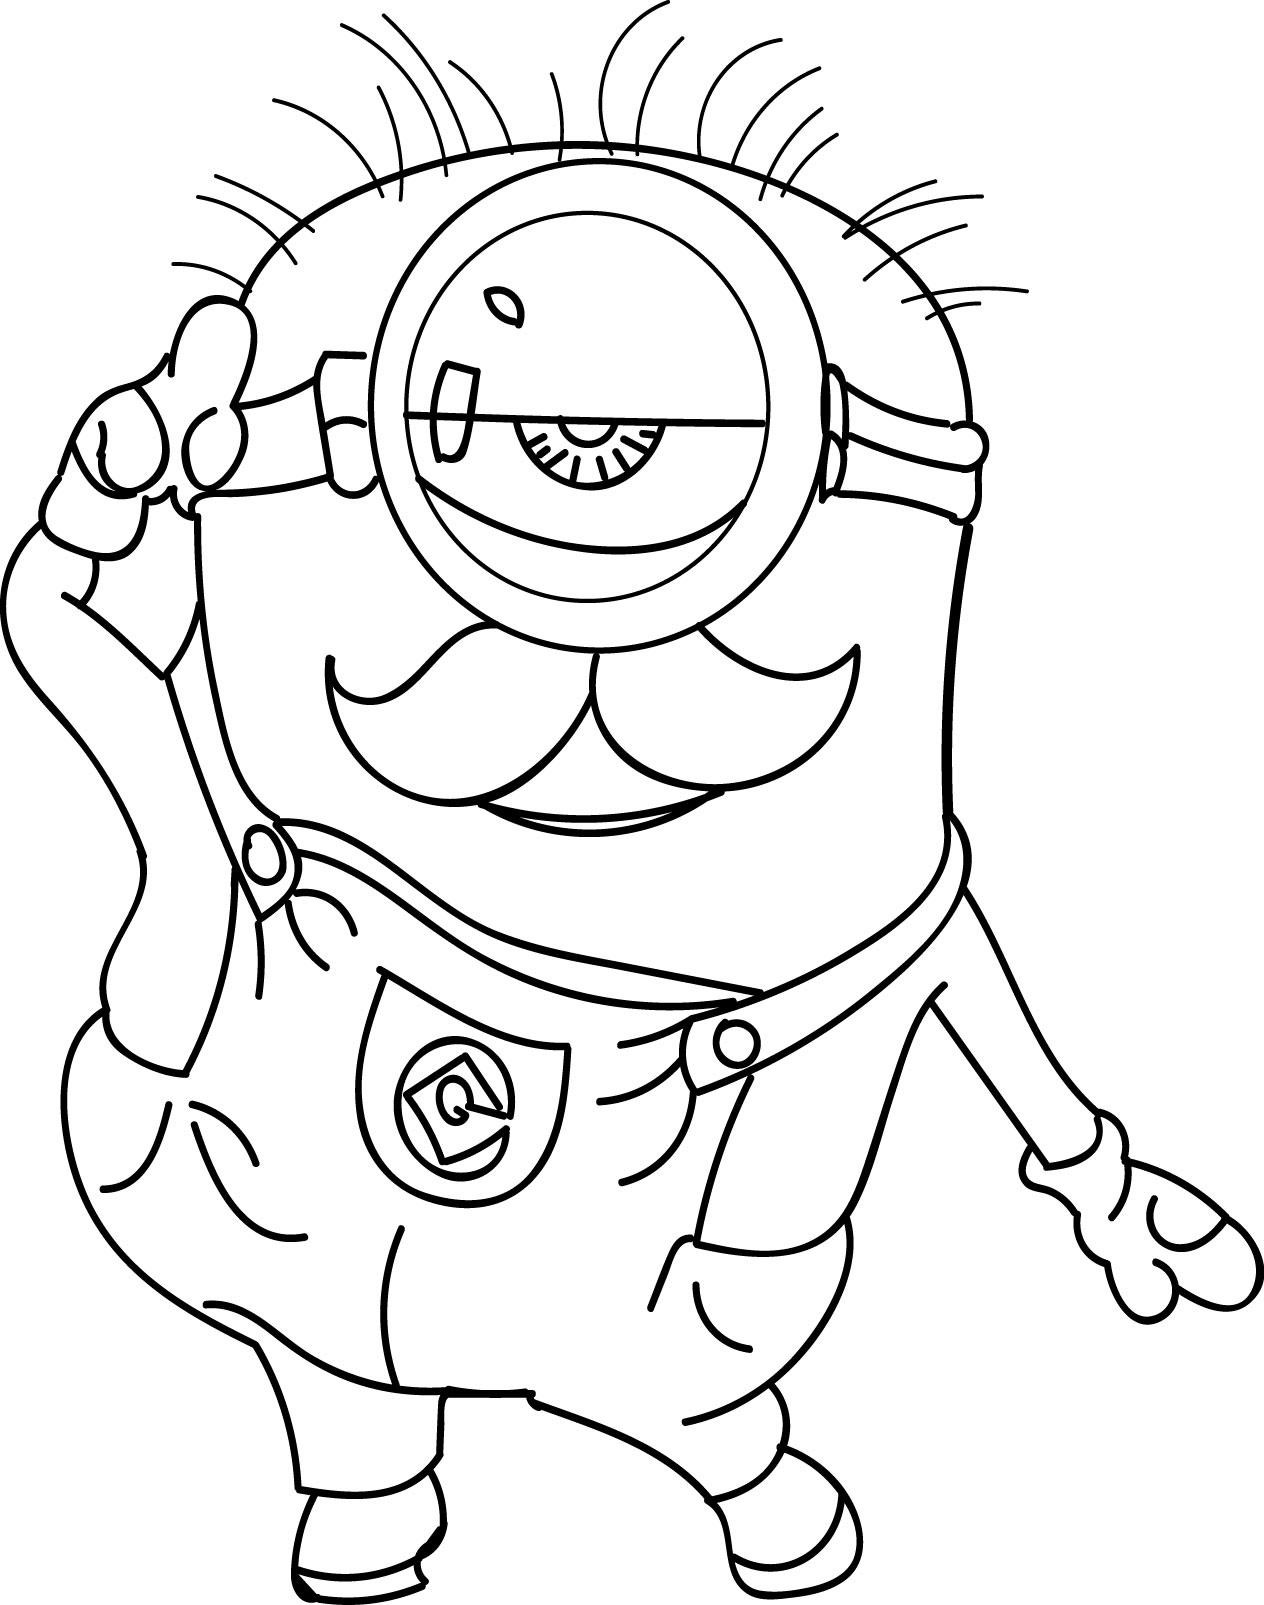 Minion-Coloring-Pages-Printable-Coloring-Pages-Coloring-Page-2